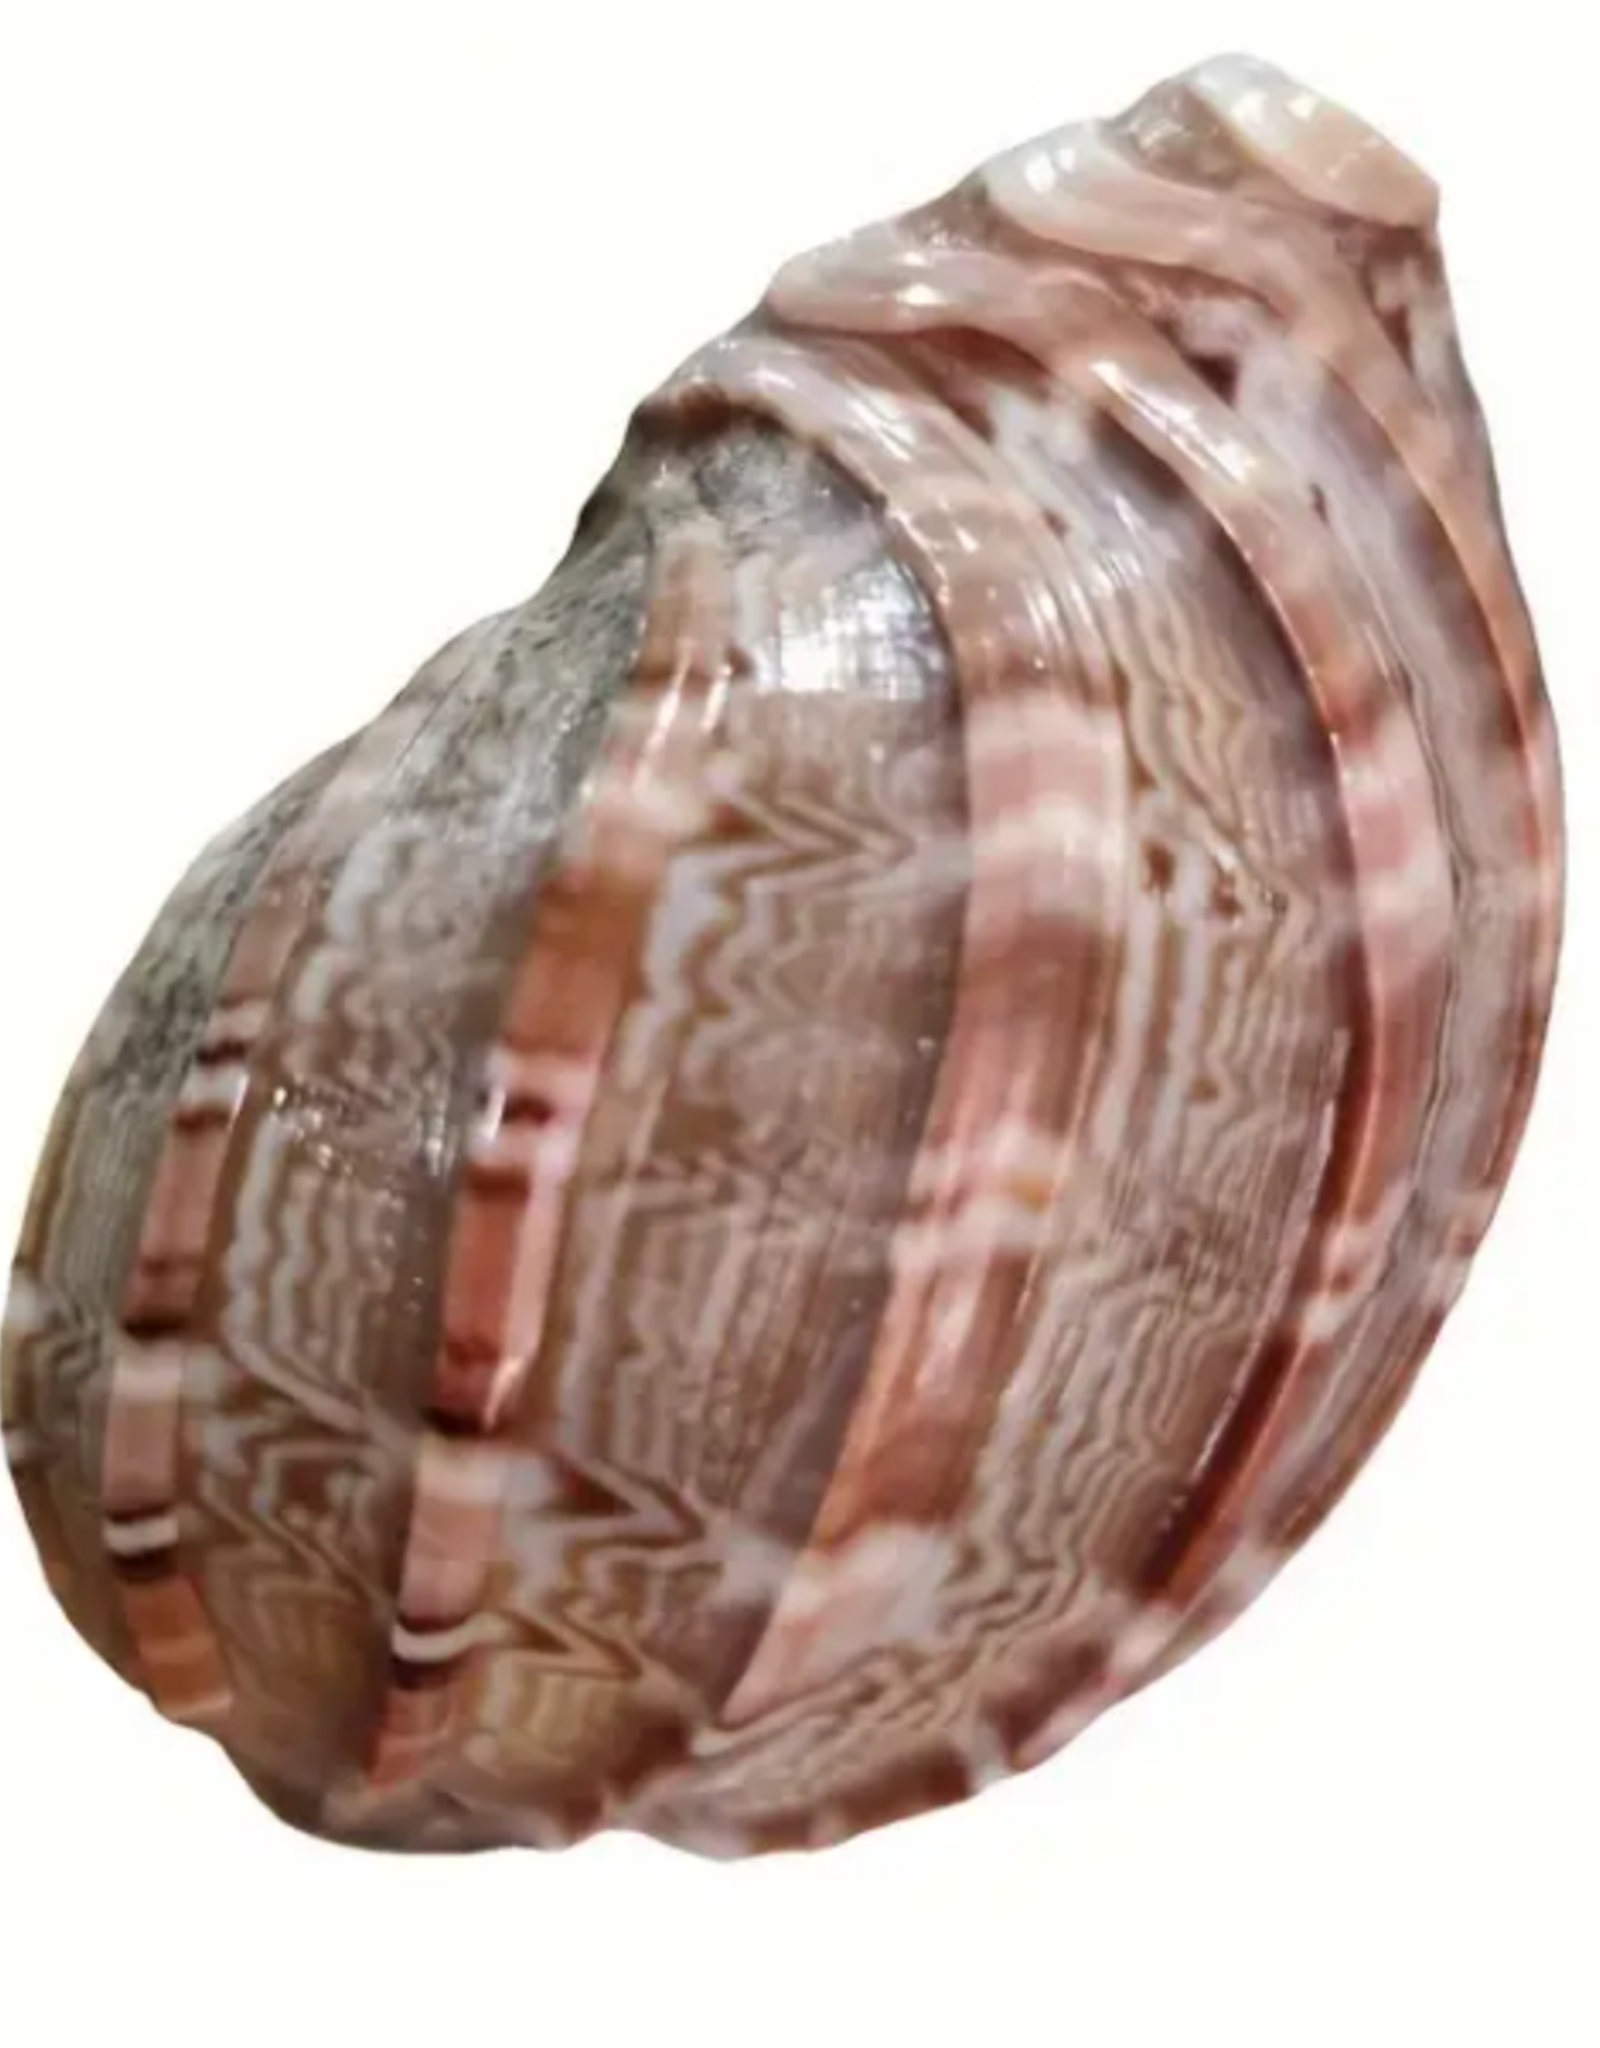 ZOO MED LABORATORIES, INC. HERMIT CRAB SHELL- 2X2X3- LARGE- *SHELL DESIGN VARIES